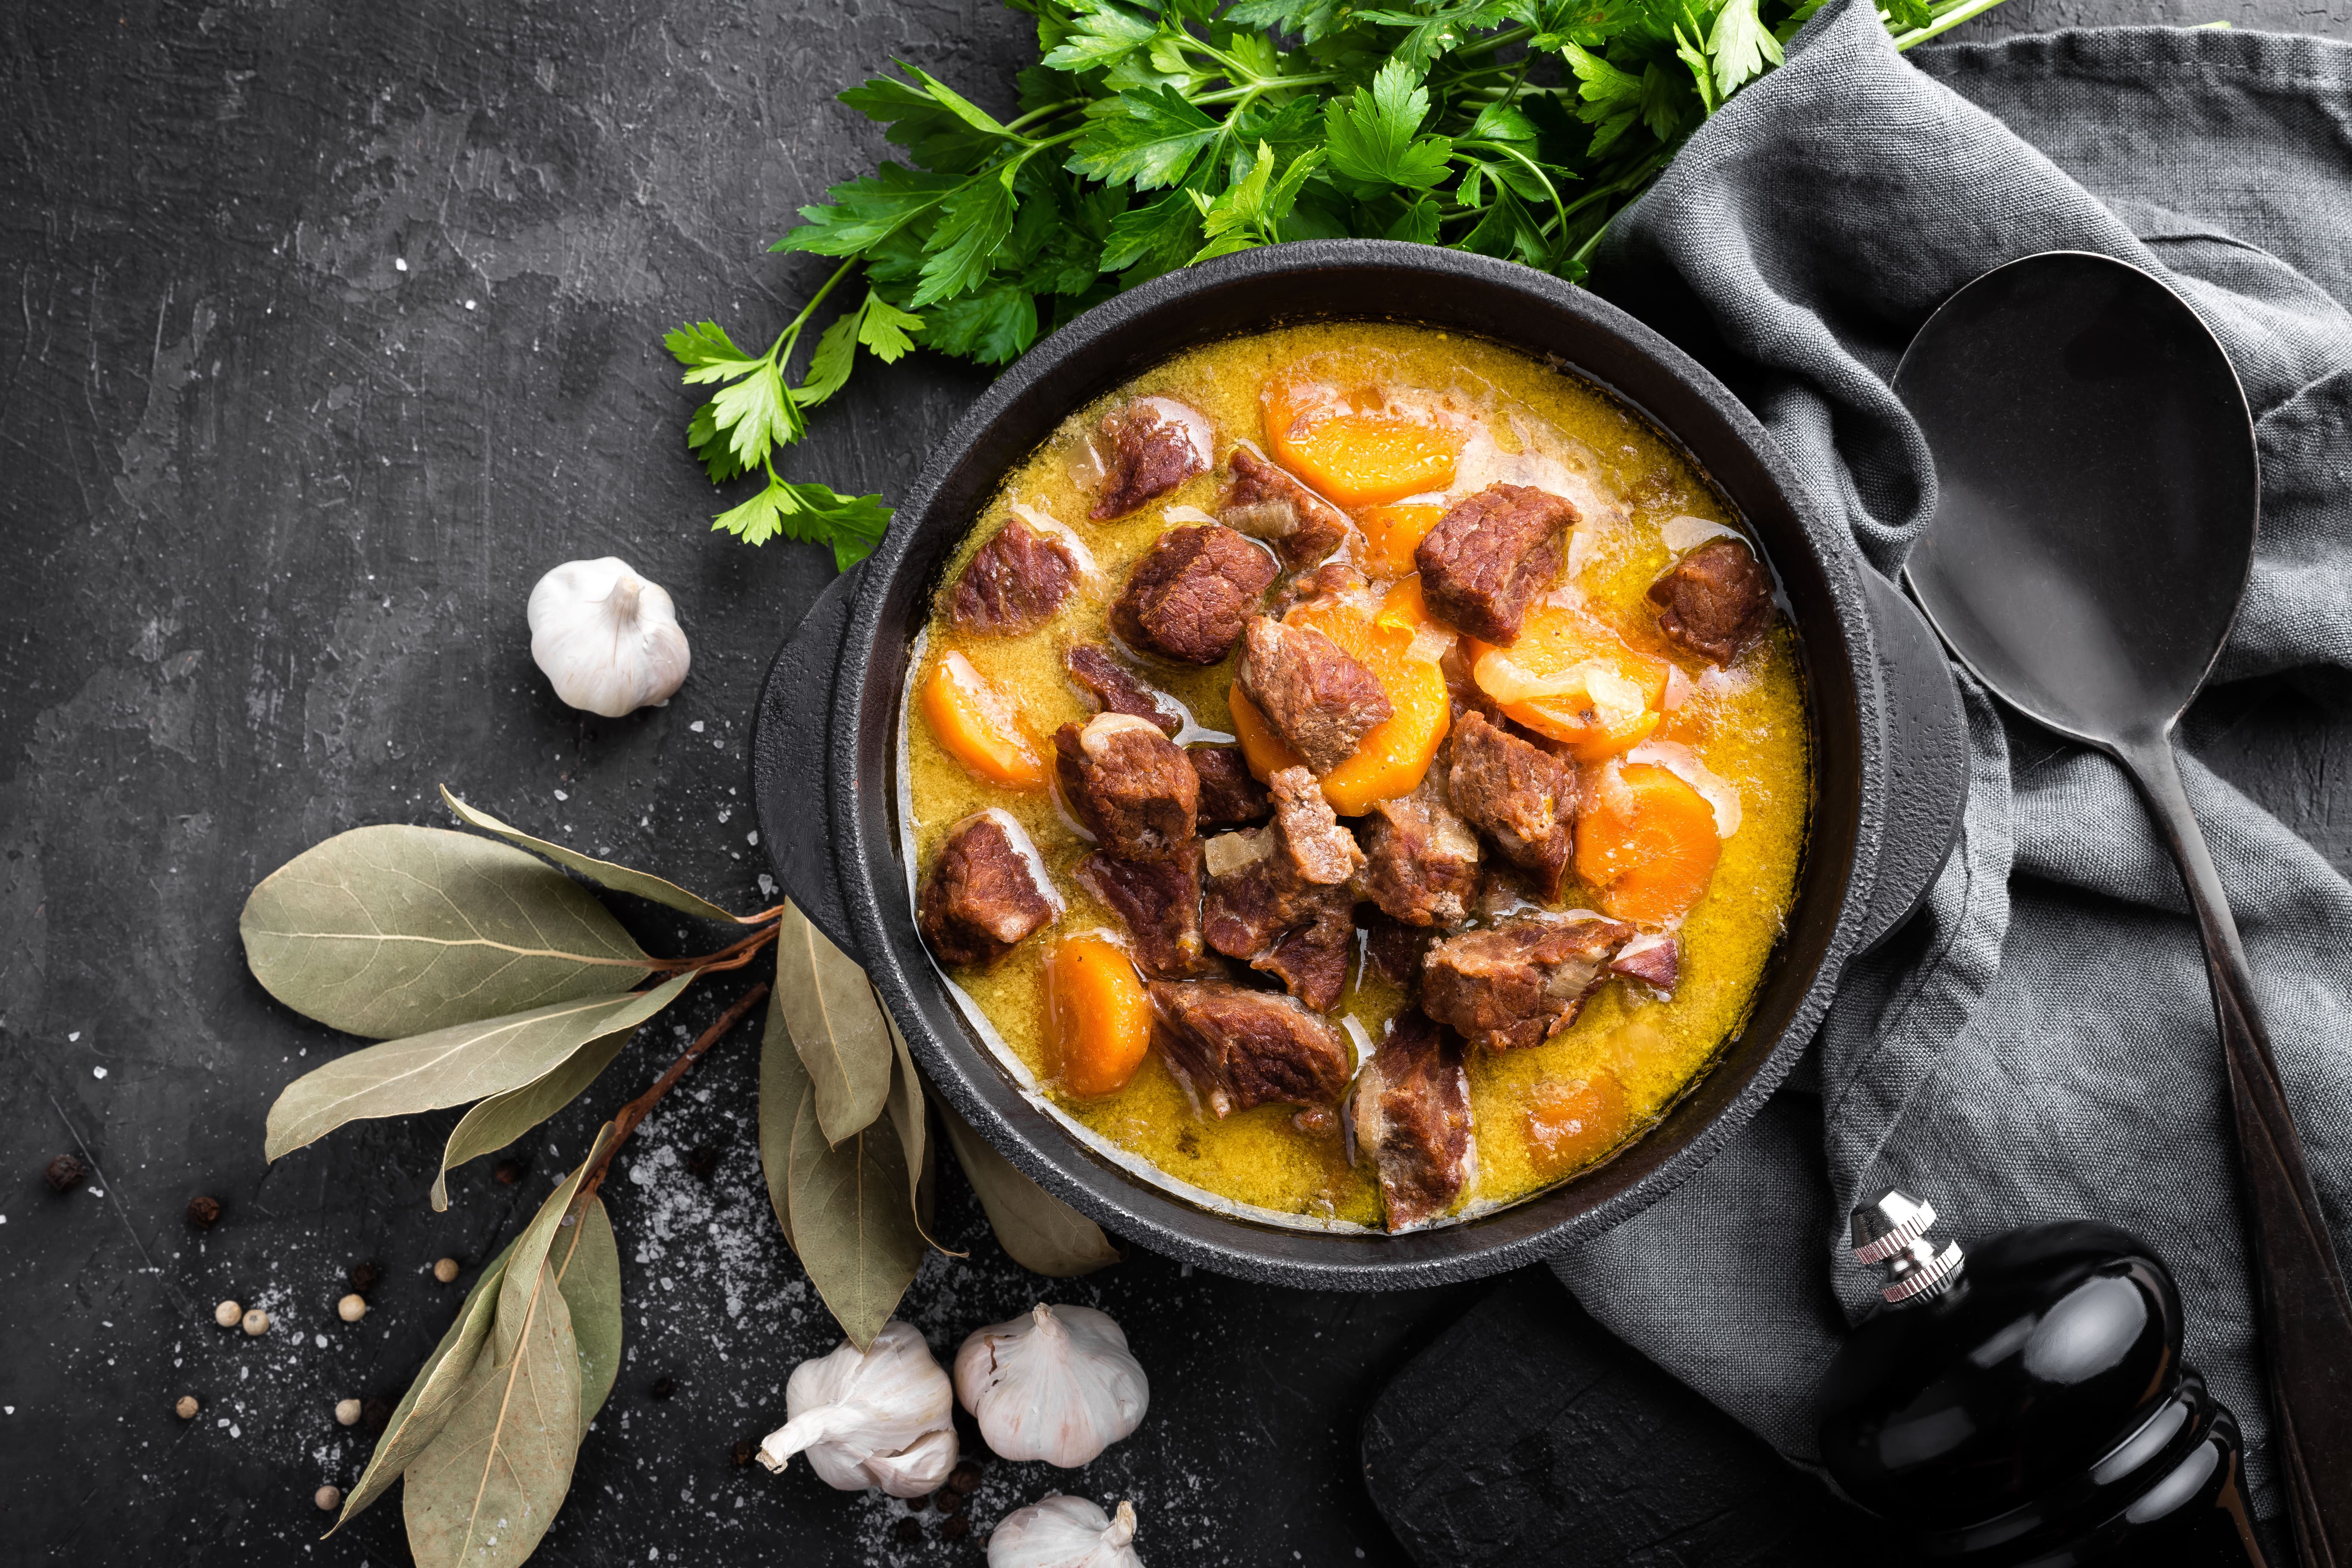 Going Keto? This Bacon Cheeseburger Soup is For You!